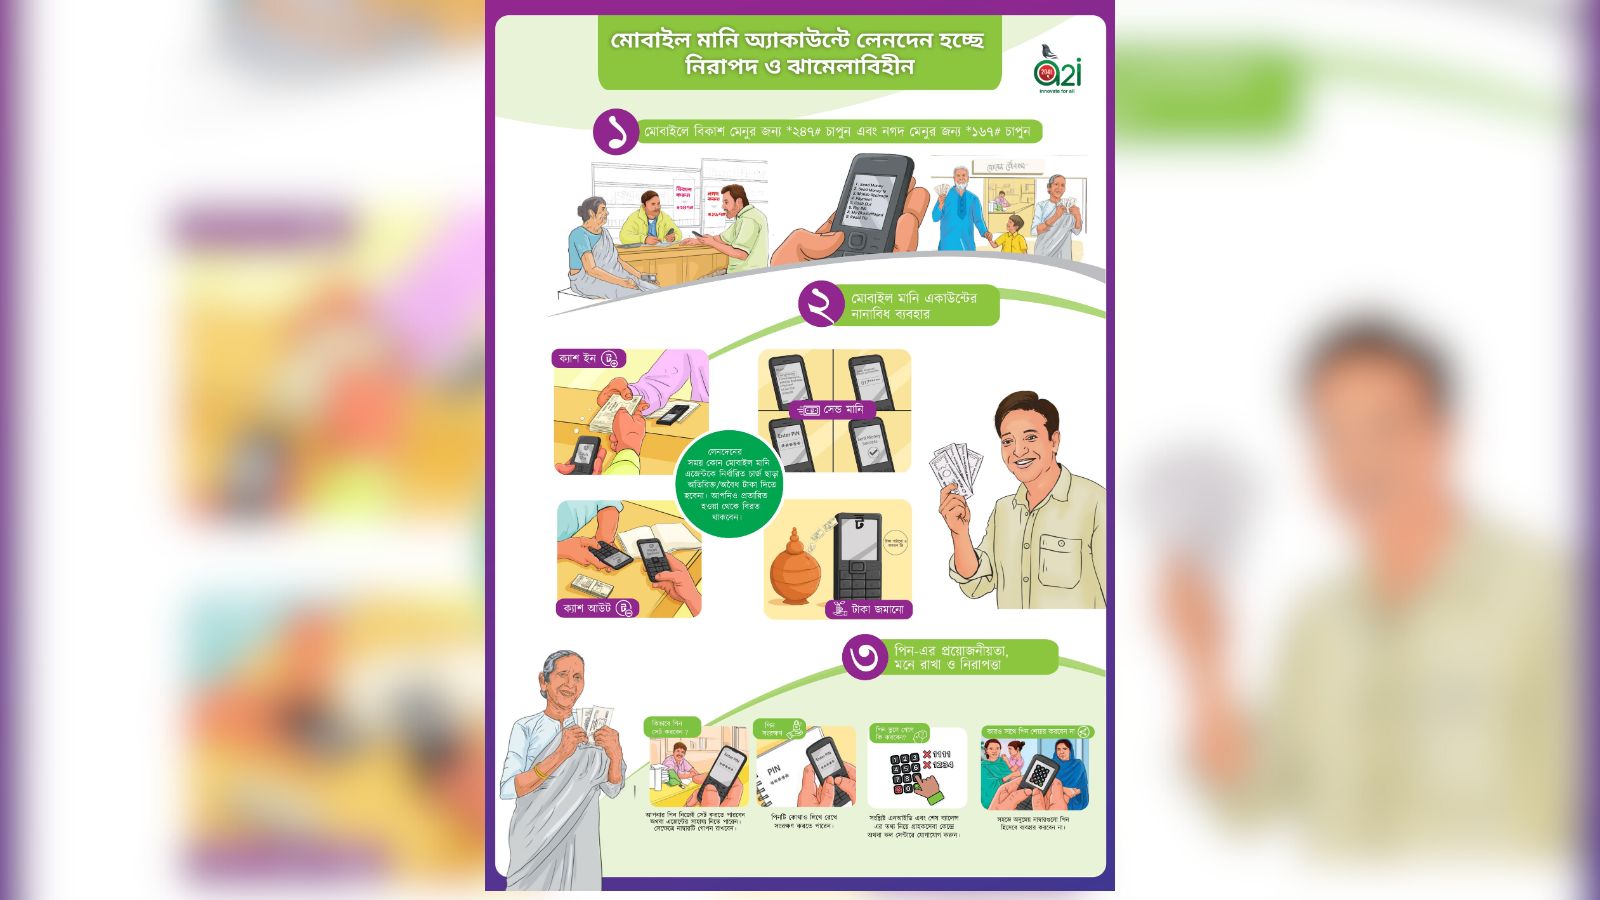 The informational poster about mobile money accounts was circulated among MFS agents and social assistance recipients during the project intervention in Bangladesh.